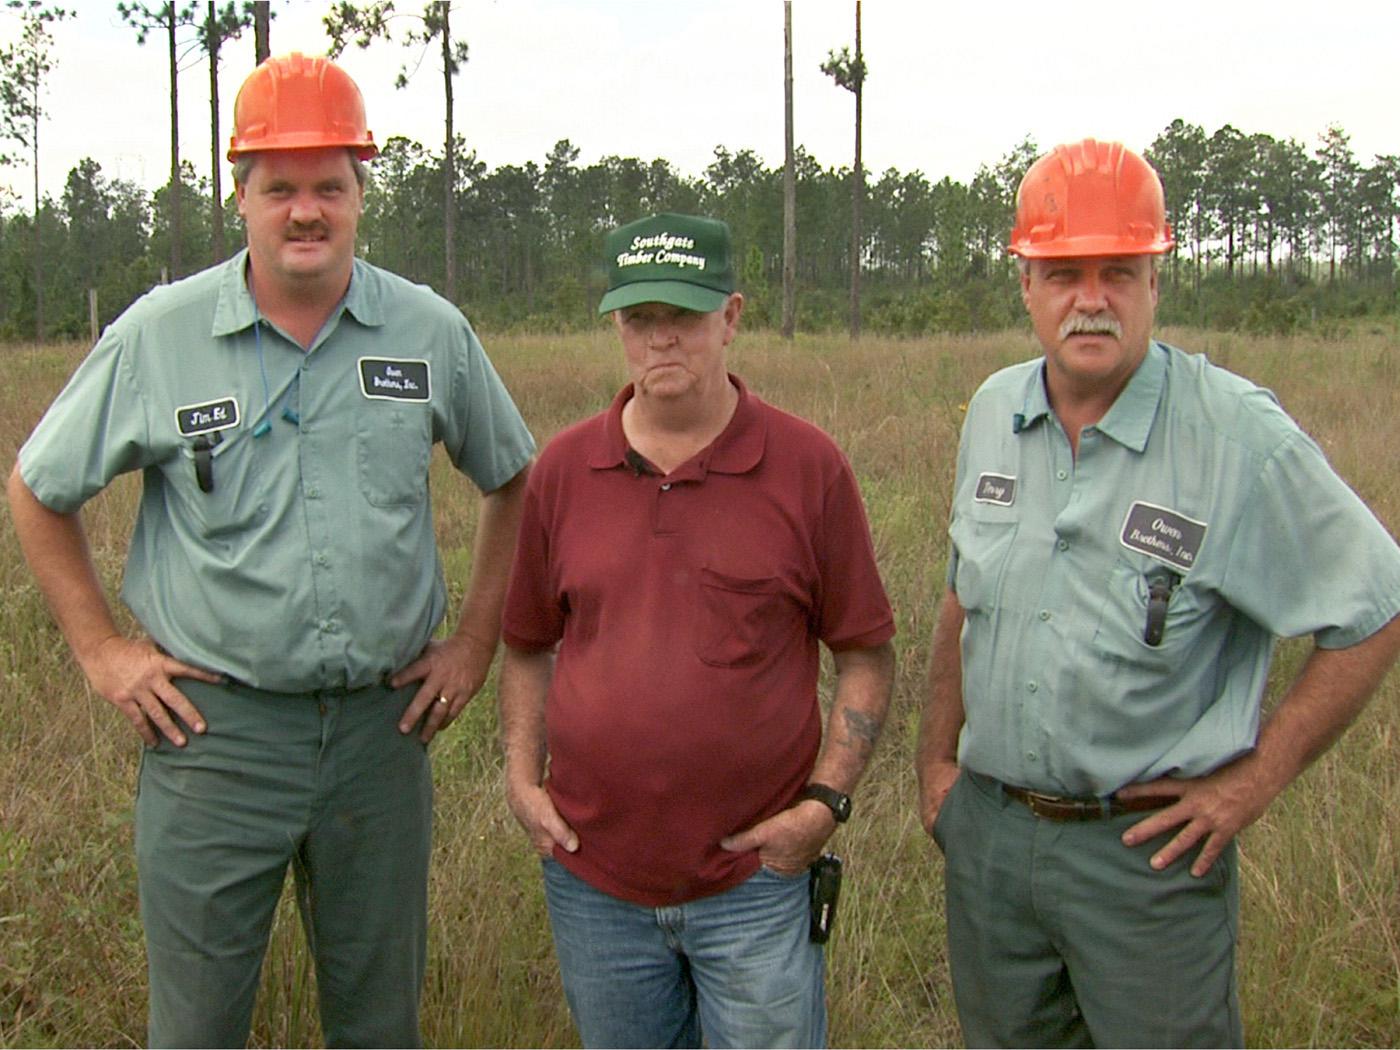 Jim Ed Owen, left, and Terry Owen, far right, of Wiggins, learned the craft of logging and the importance of stewardship from their father, Walt. The brothers have operated their own business for more than 11 years. (Photo bb Leighton Spann)